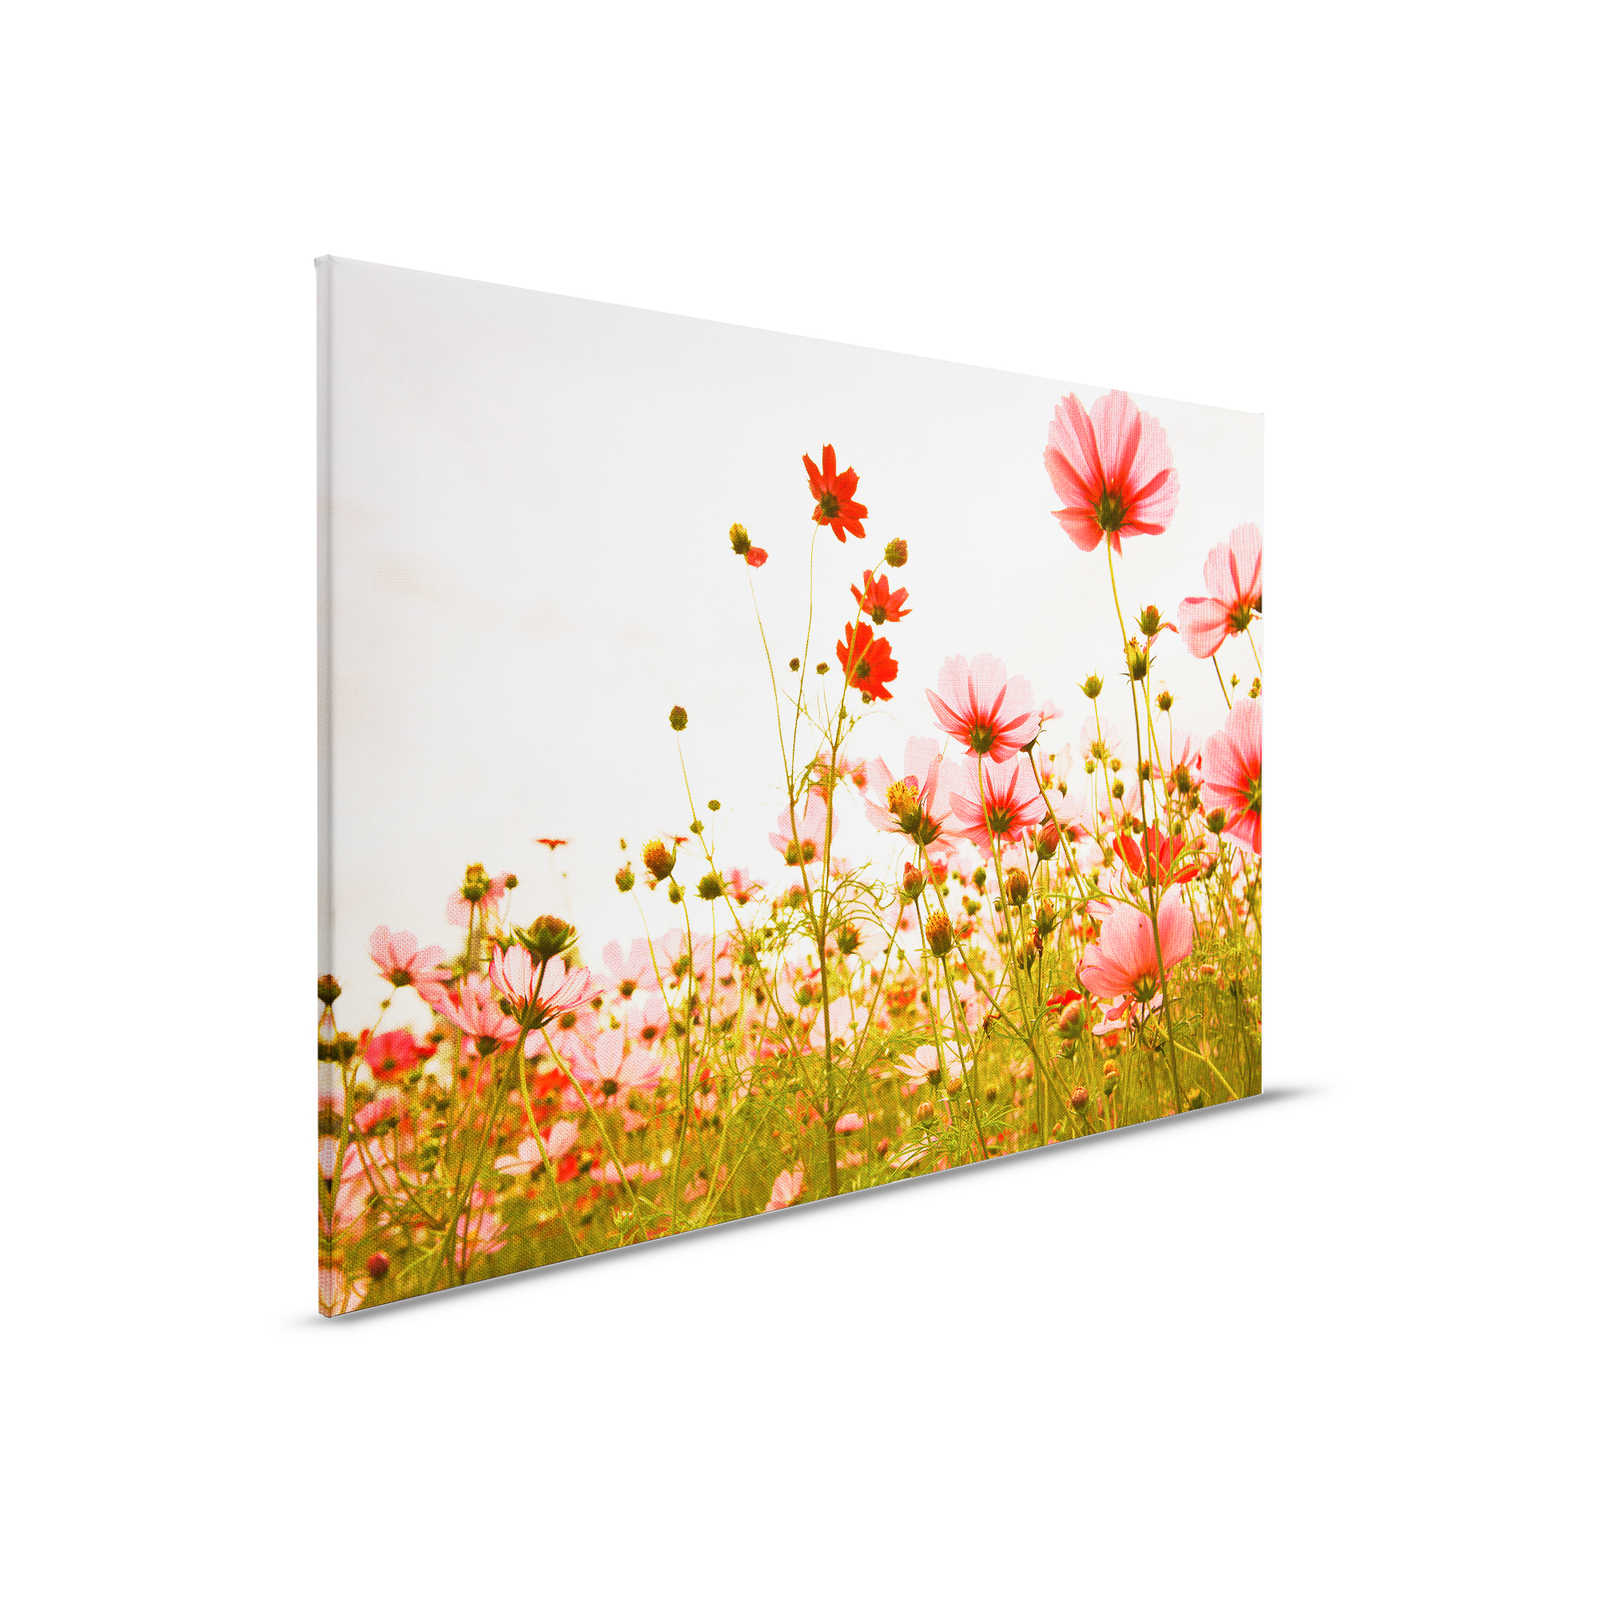         Canvas with flower meadow in spring | pink, green, white - 0.90 m x 0.60 m
    